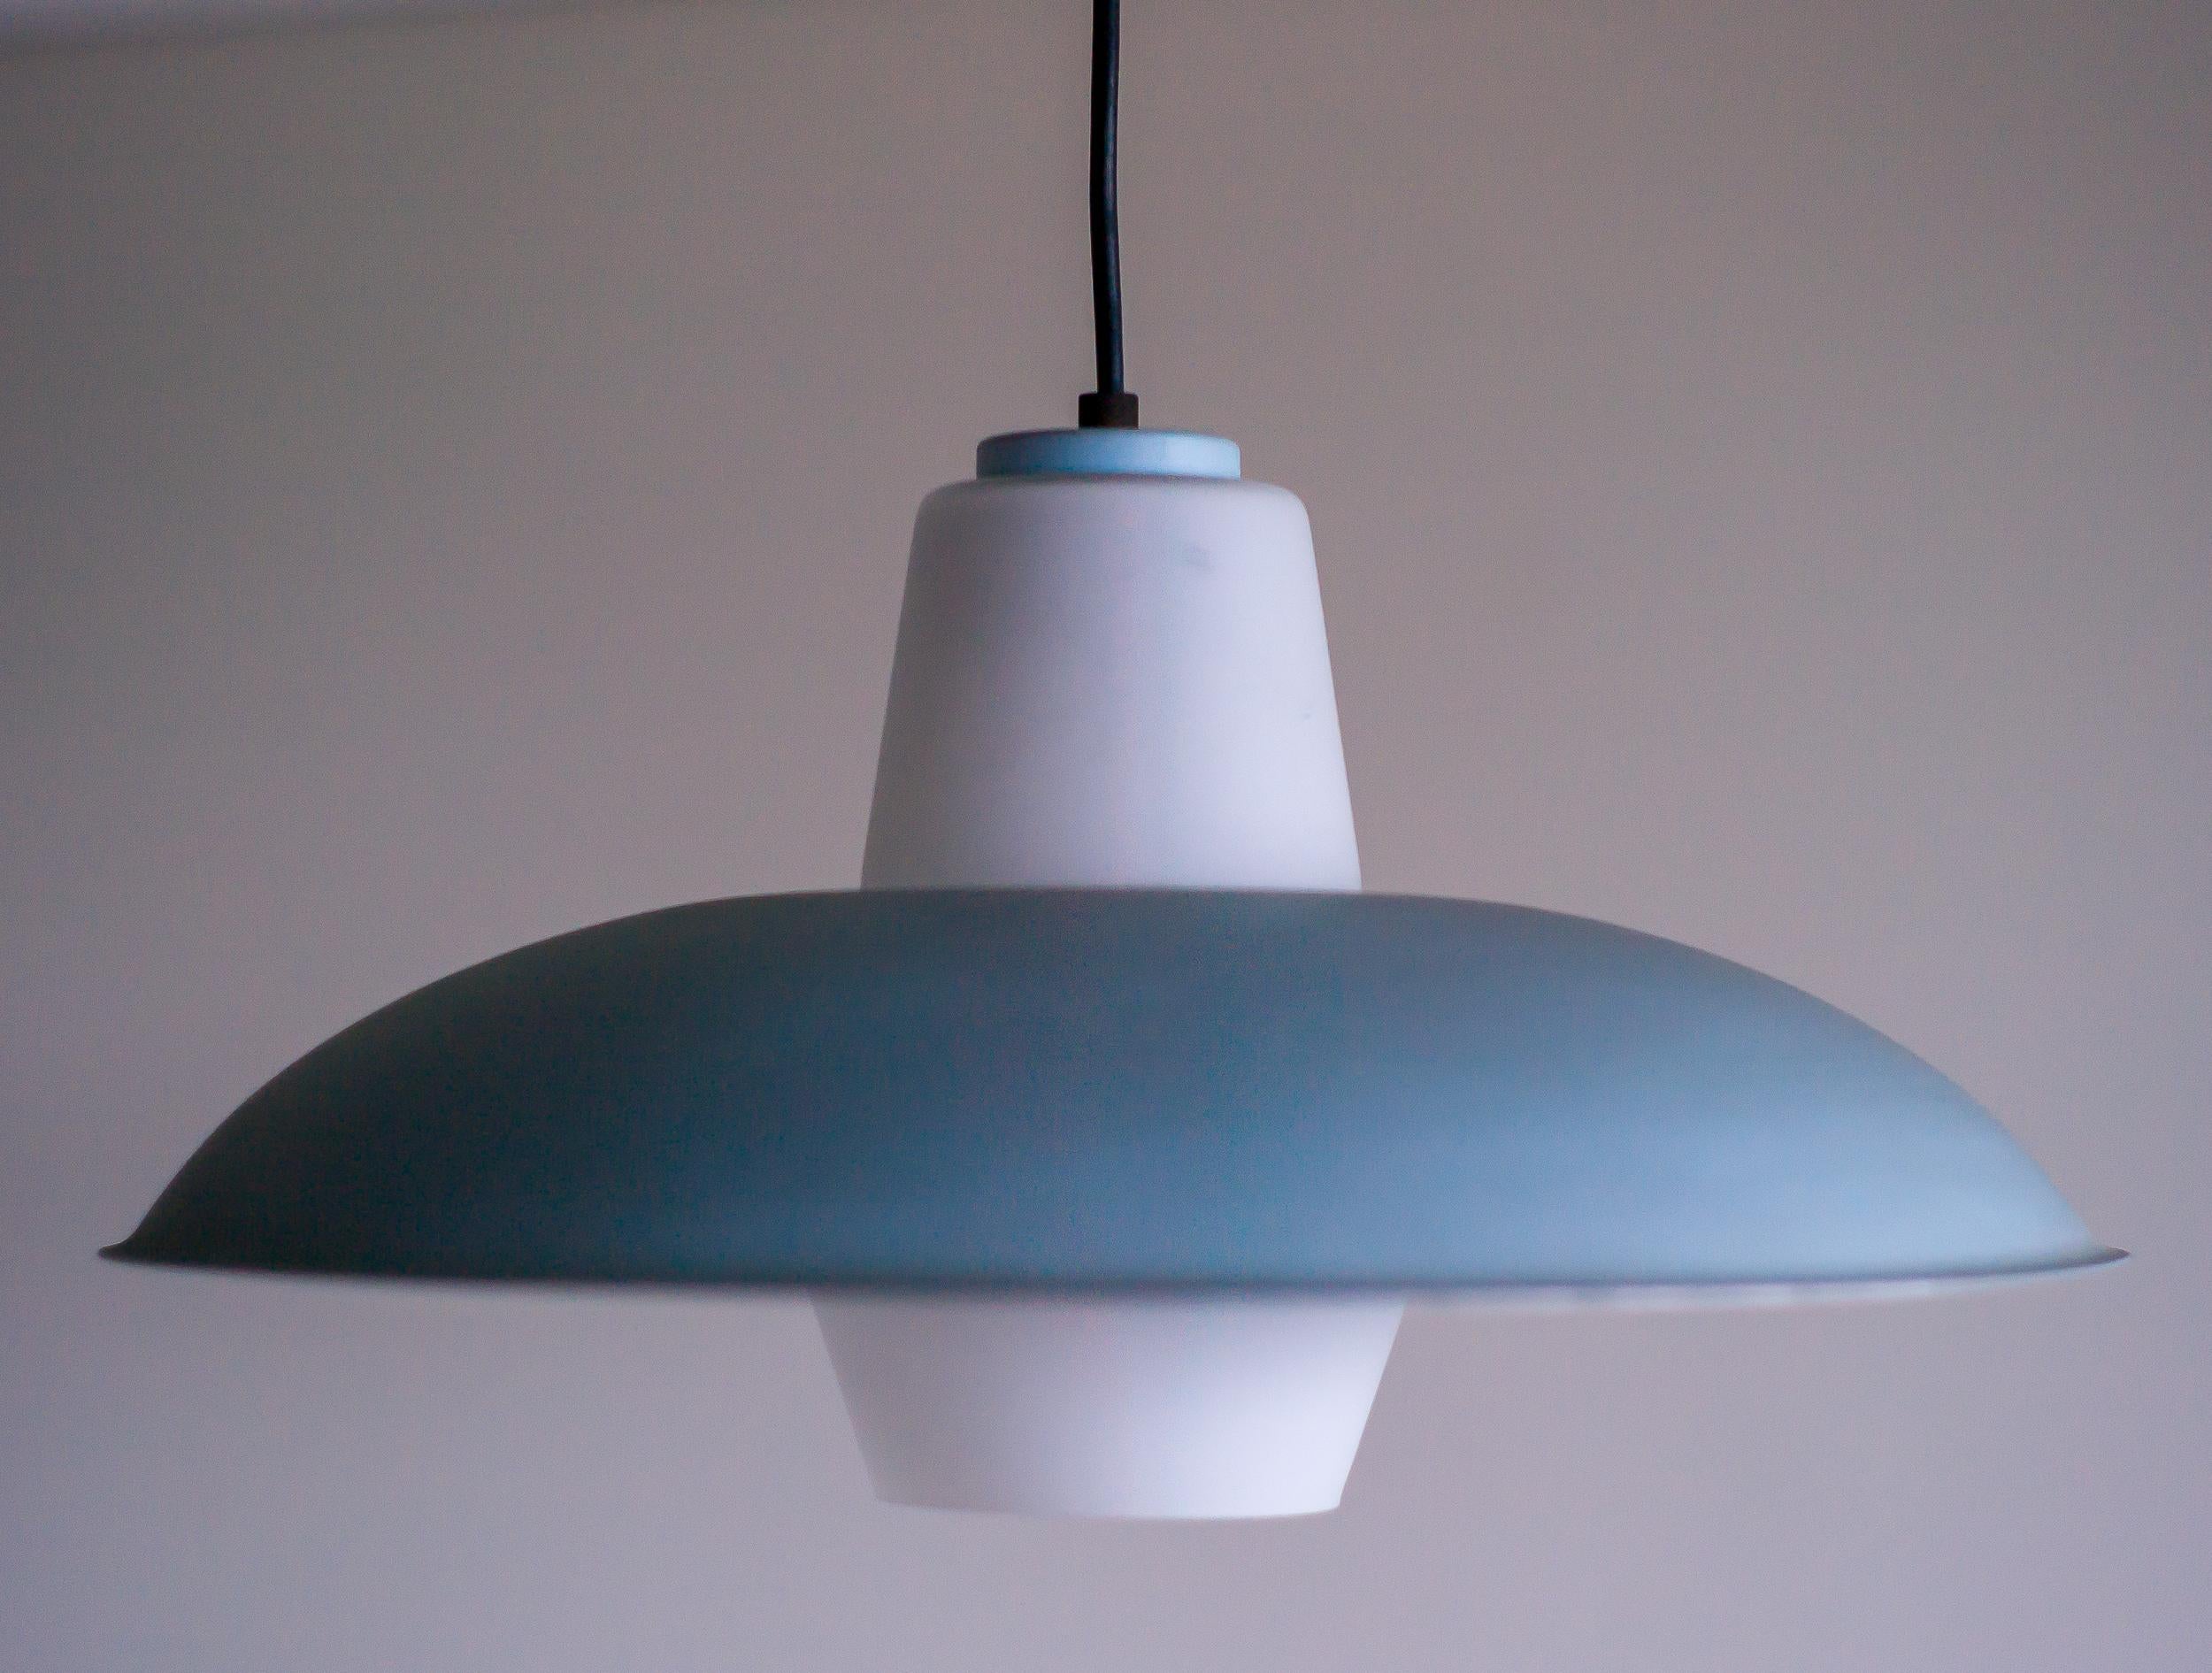 Wonderful Mid-Century Modern Dutch frosted glass pendant with light blue and dark blue enameled aluminum shades designed by Louis Kalff for Philips, The Netherlands, circa 1956.

Louis Kalff (1897-1976) was a visionary Dutch designer known for his